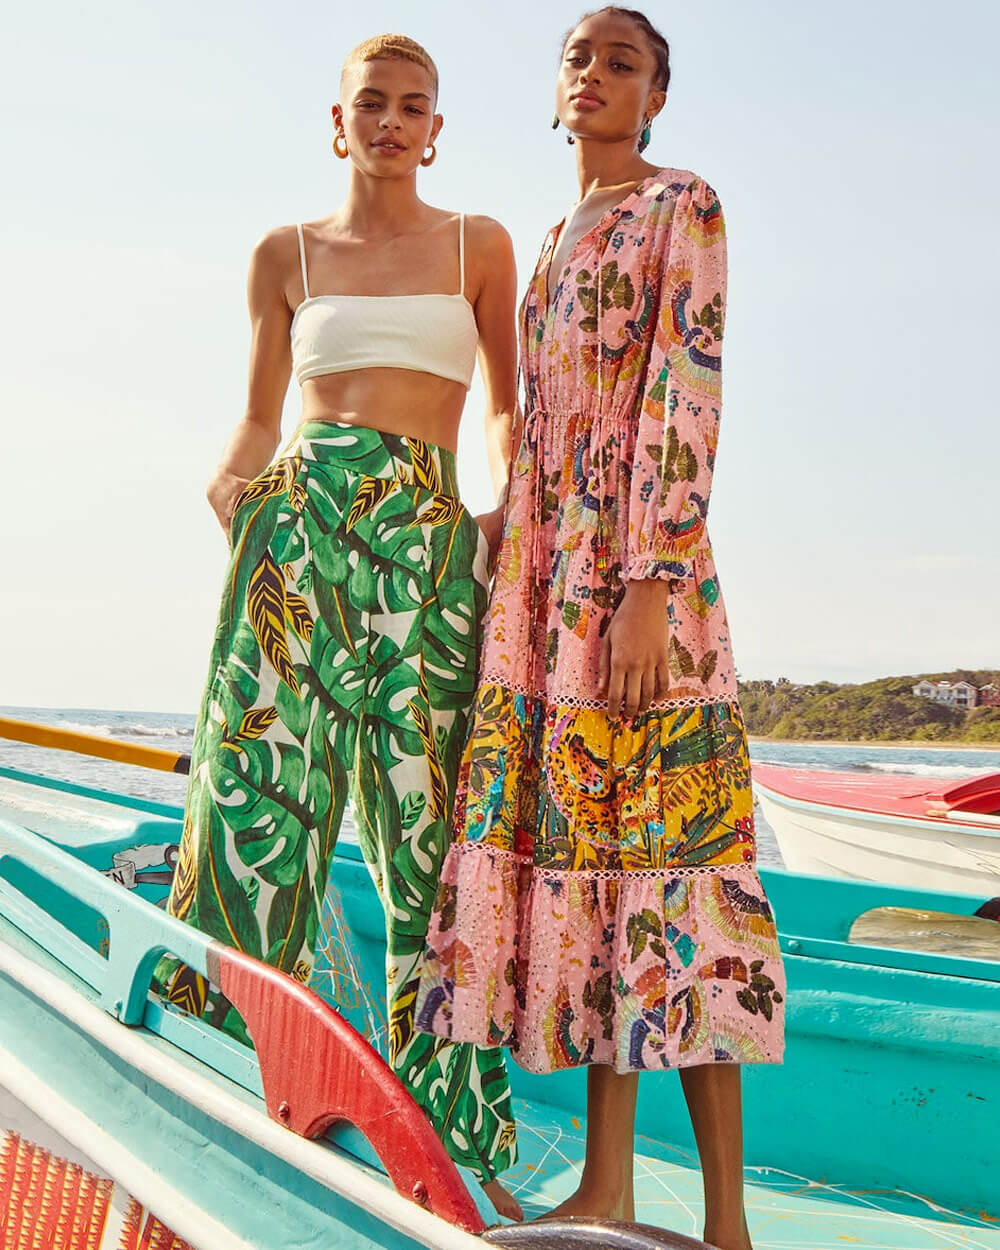 20 Brands Like Free People for Affordable Boho Chic Fashion